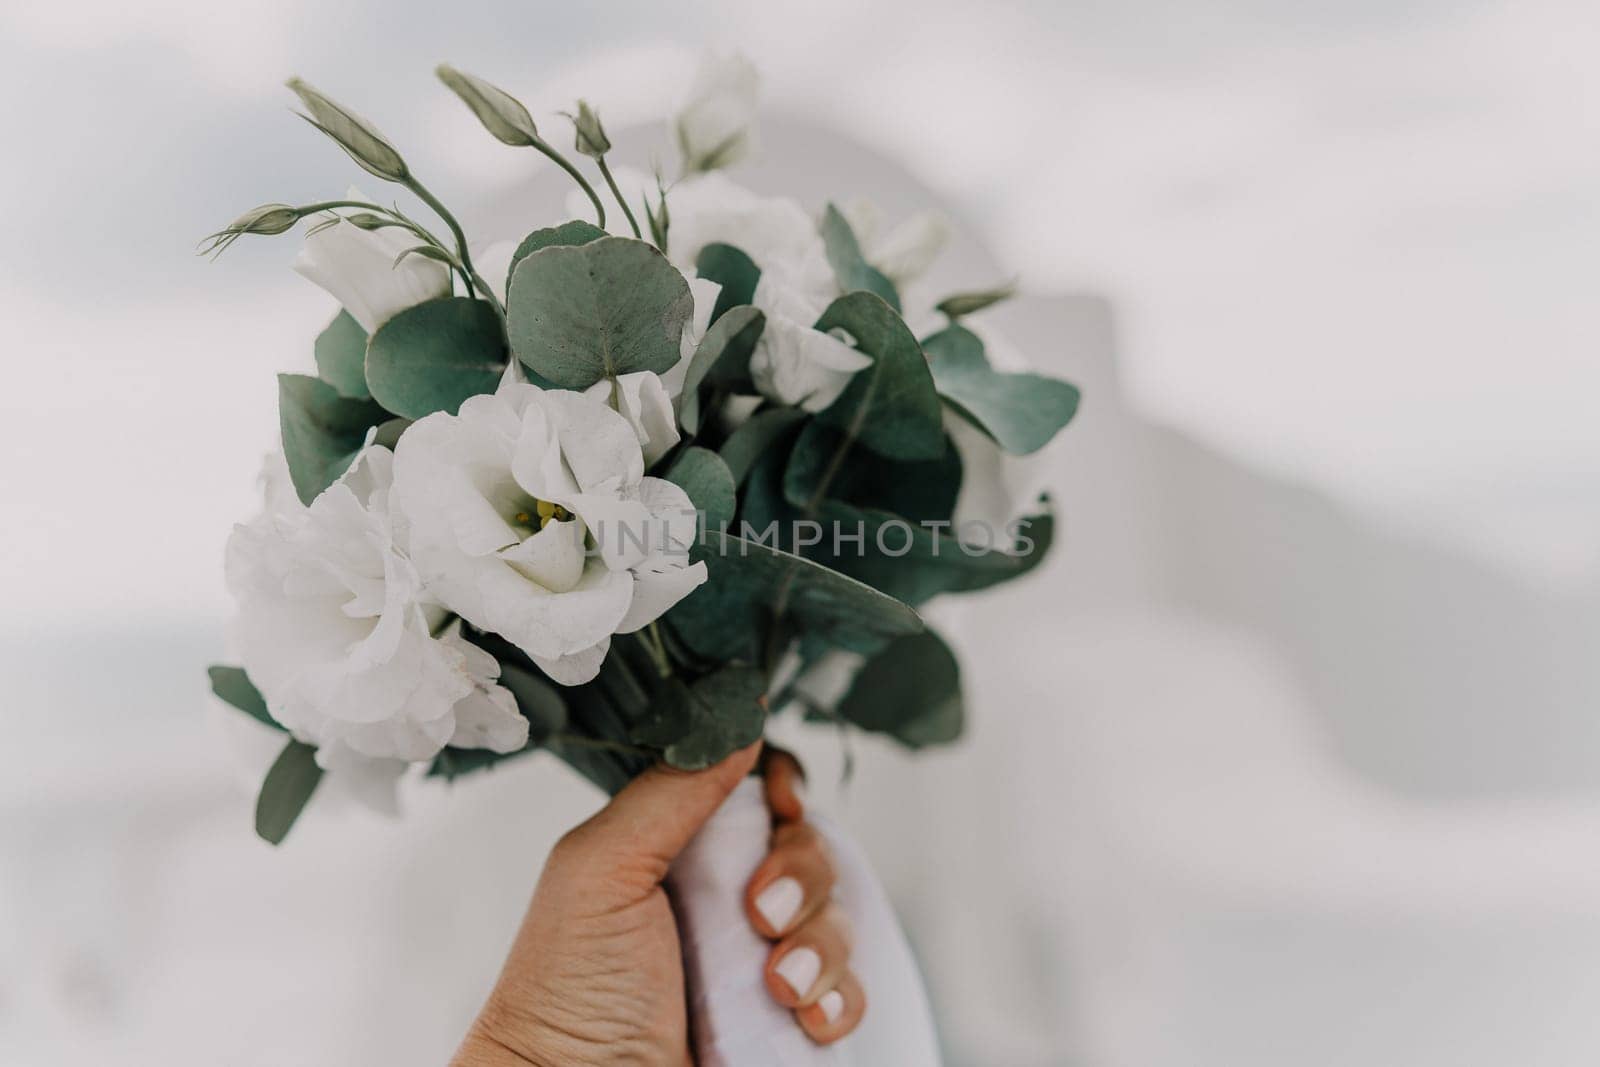 A bouquet of white flowers with green leaves is being held by a person's hand. The arrangement is simple and elegant, with the white flowers providing a clean and fresh look. by Matiunina